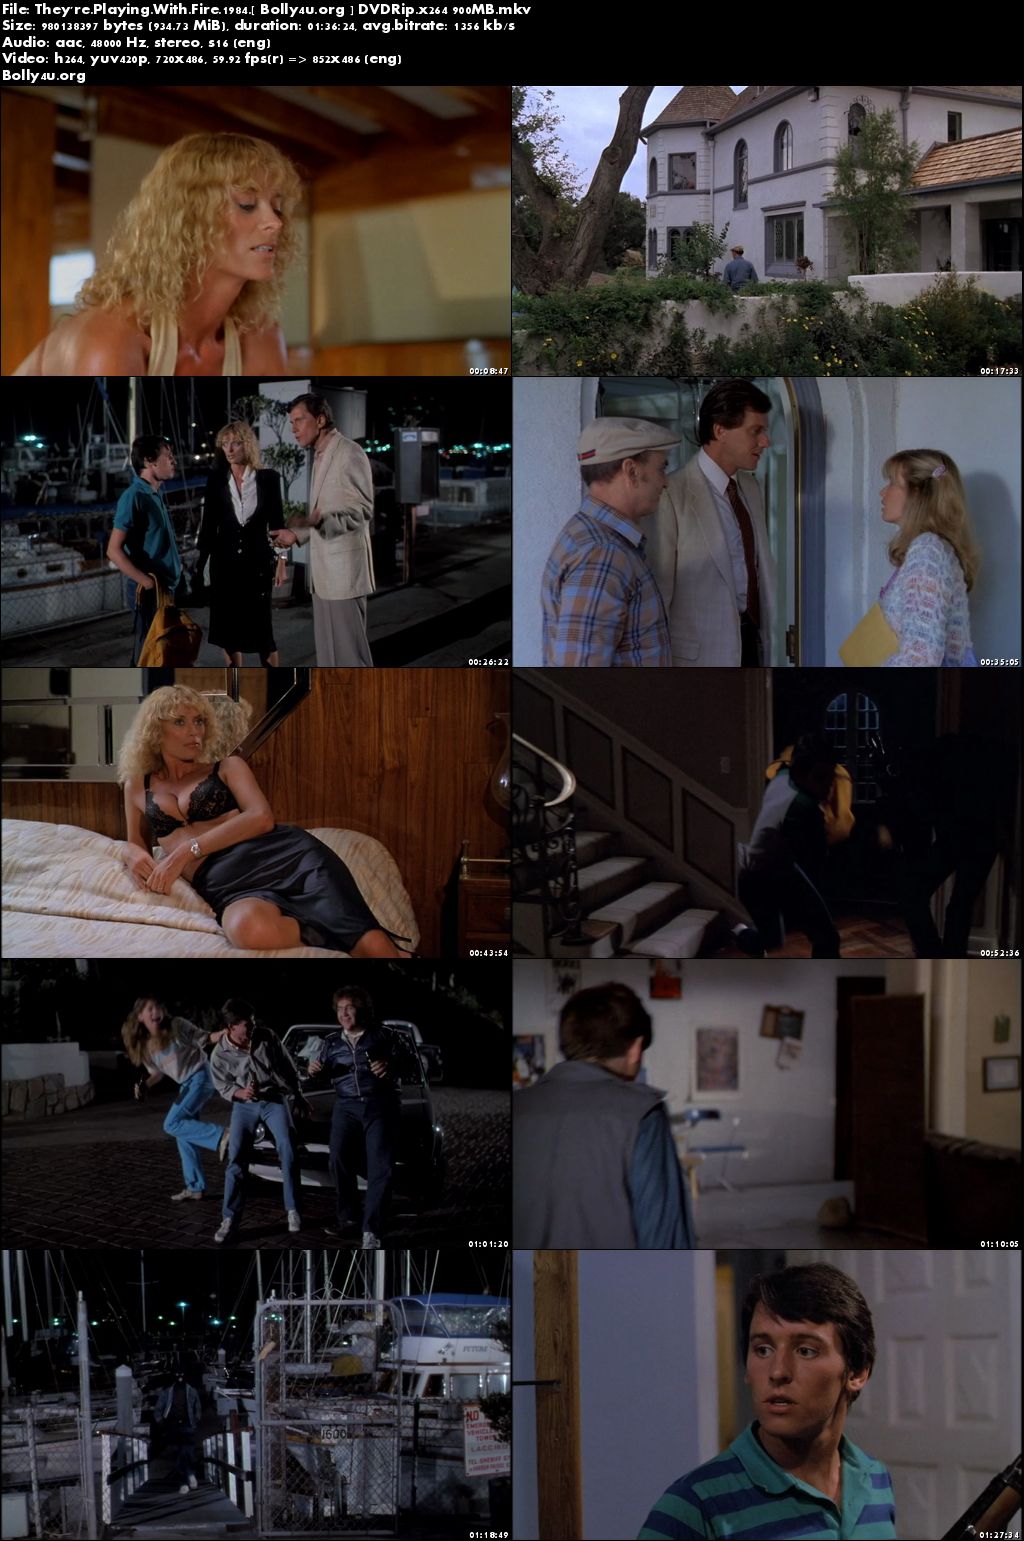 They're Playing With Fire 1984 DVDRip 900Mb UNRATED English x264 Download